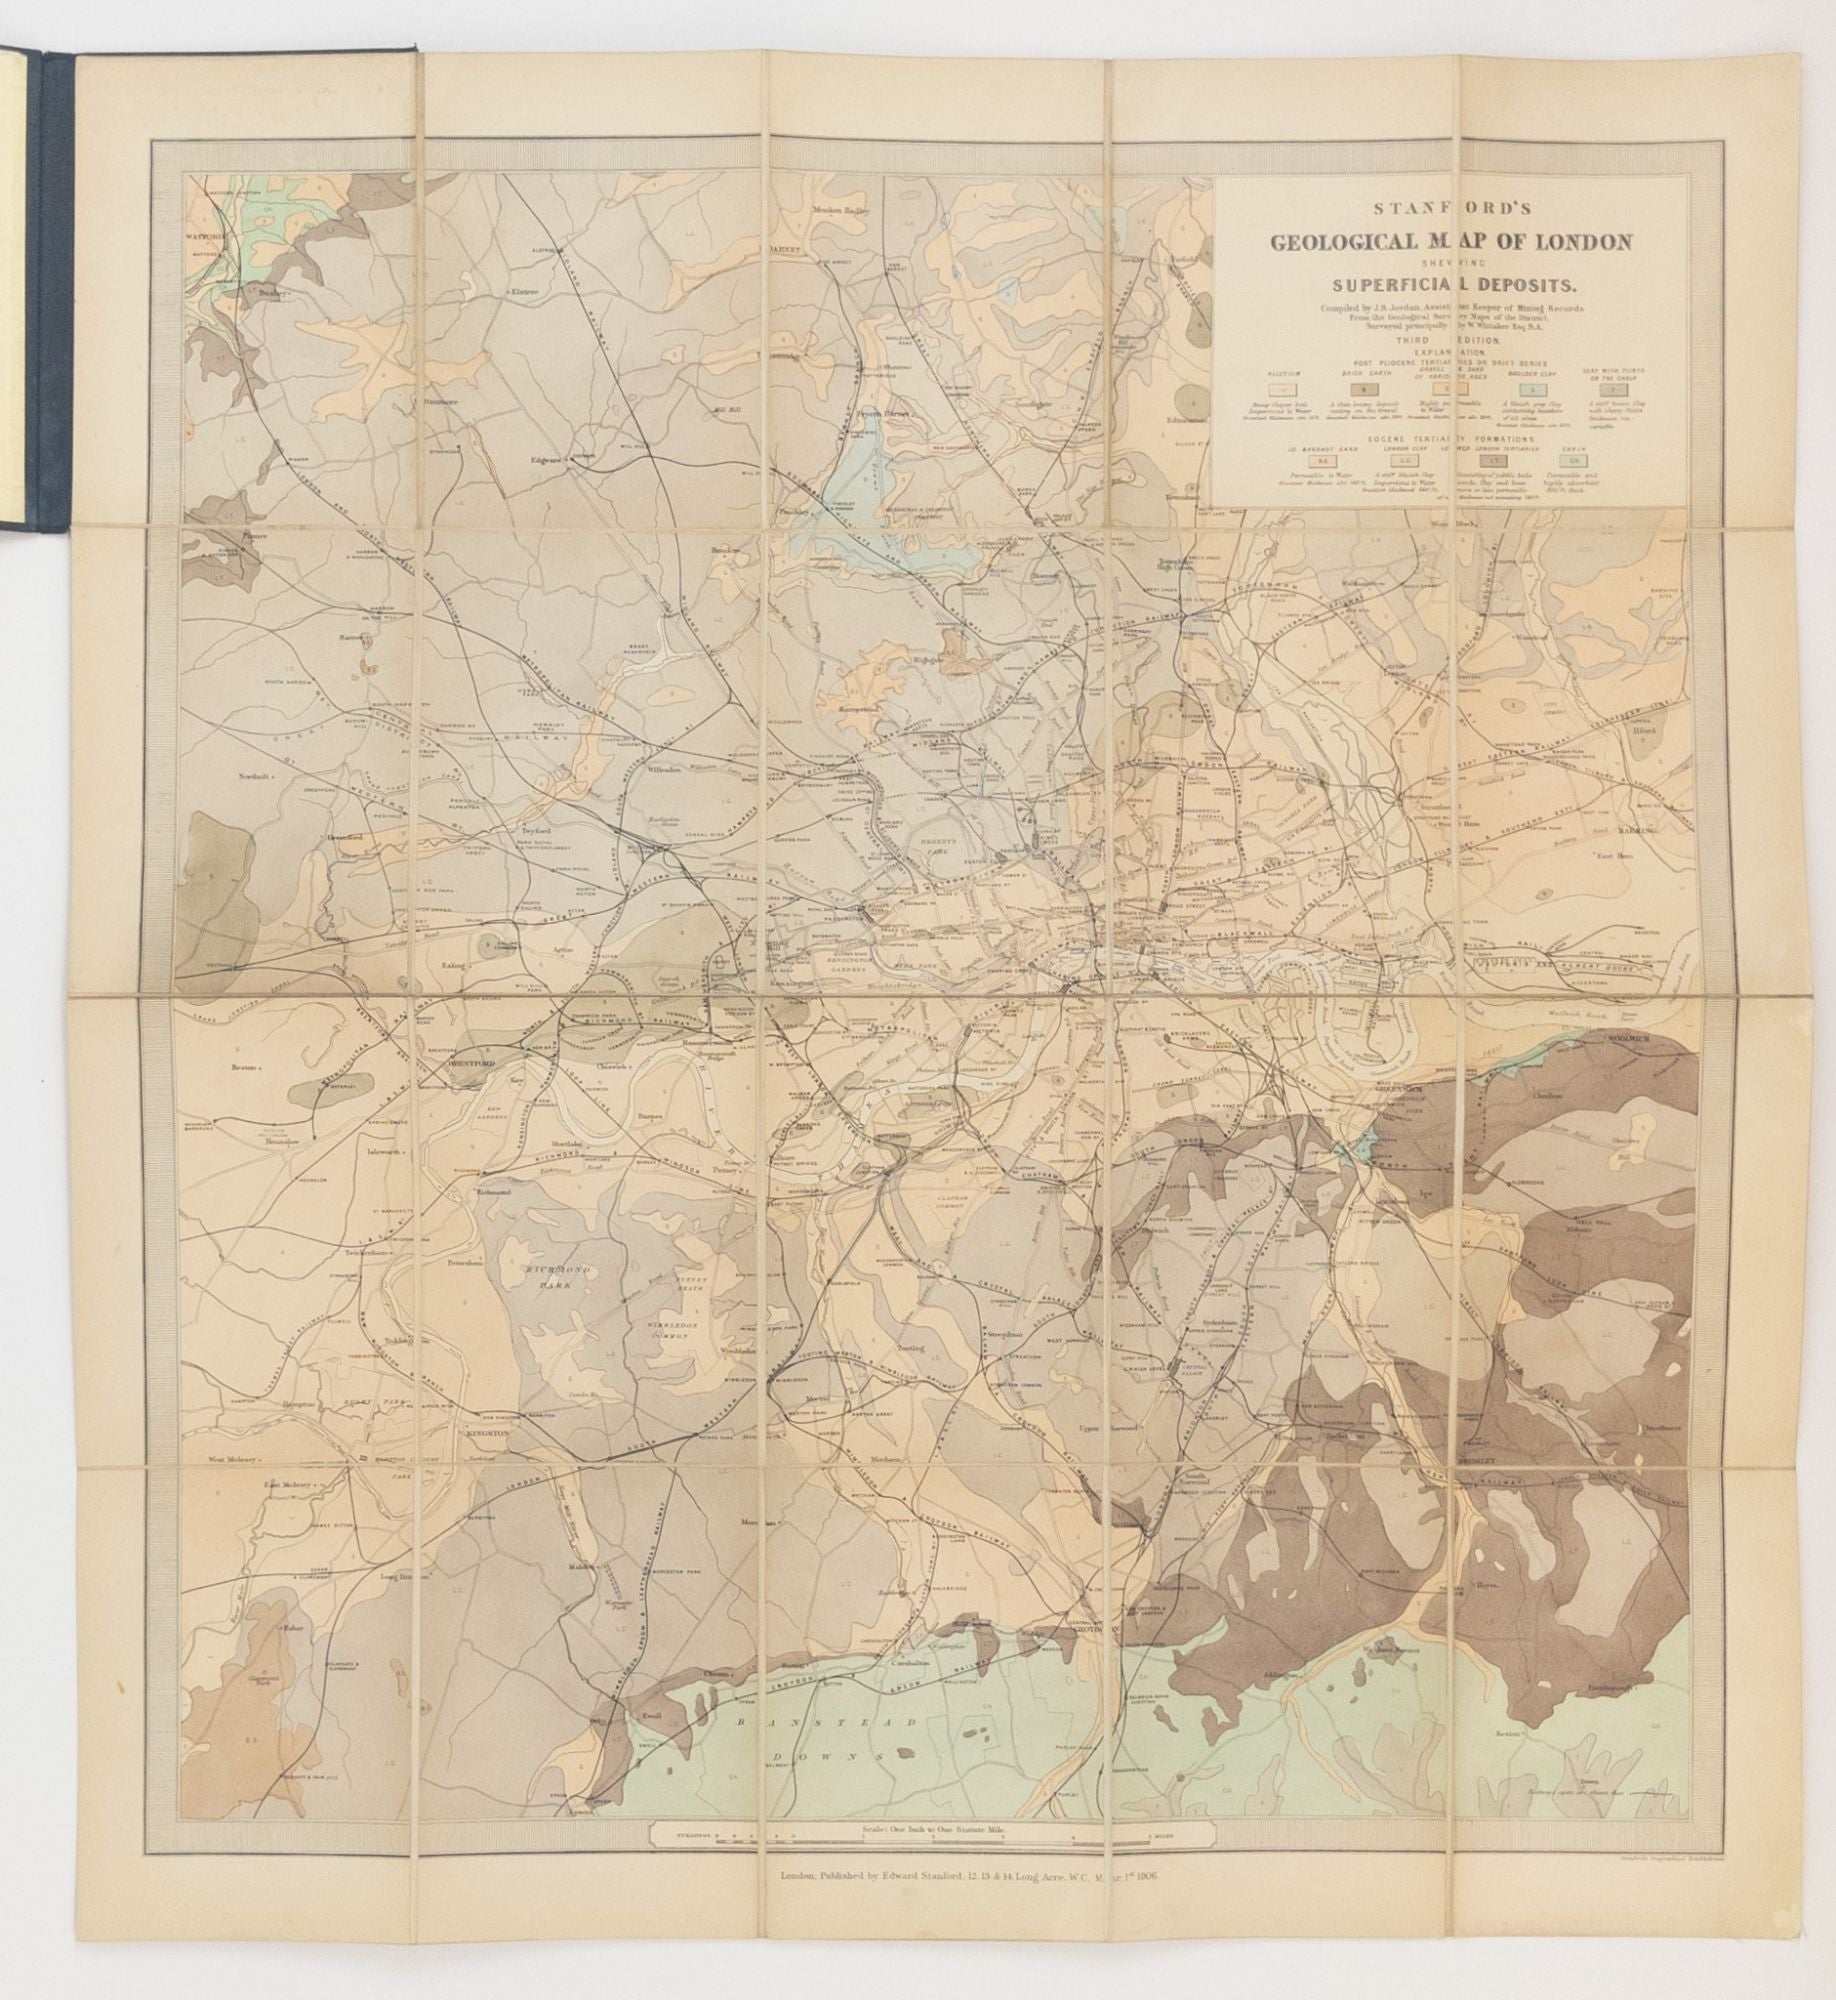 Product Image for STANFORD'S GEOLOGICAL MAP OF LONDON : SHEWING SUPERFICIAL DEPOSITS